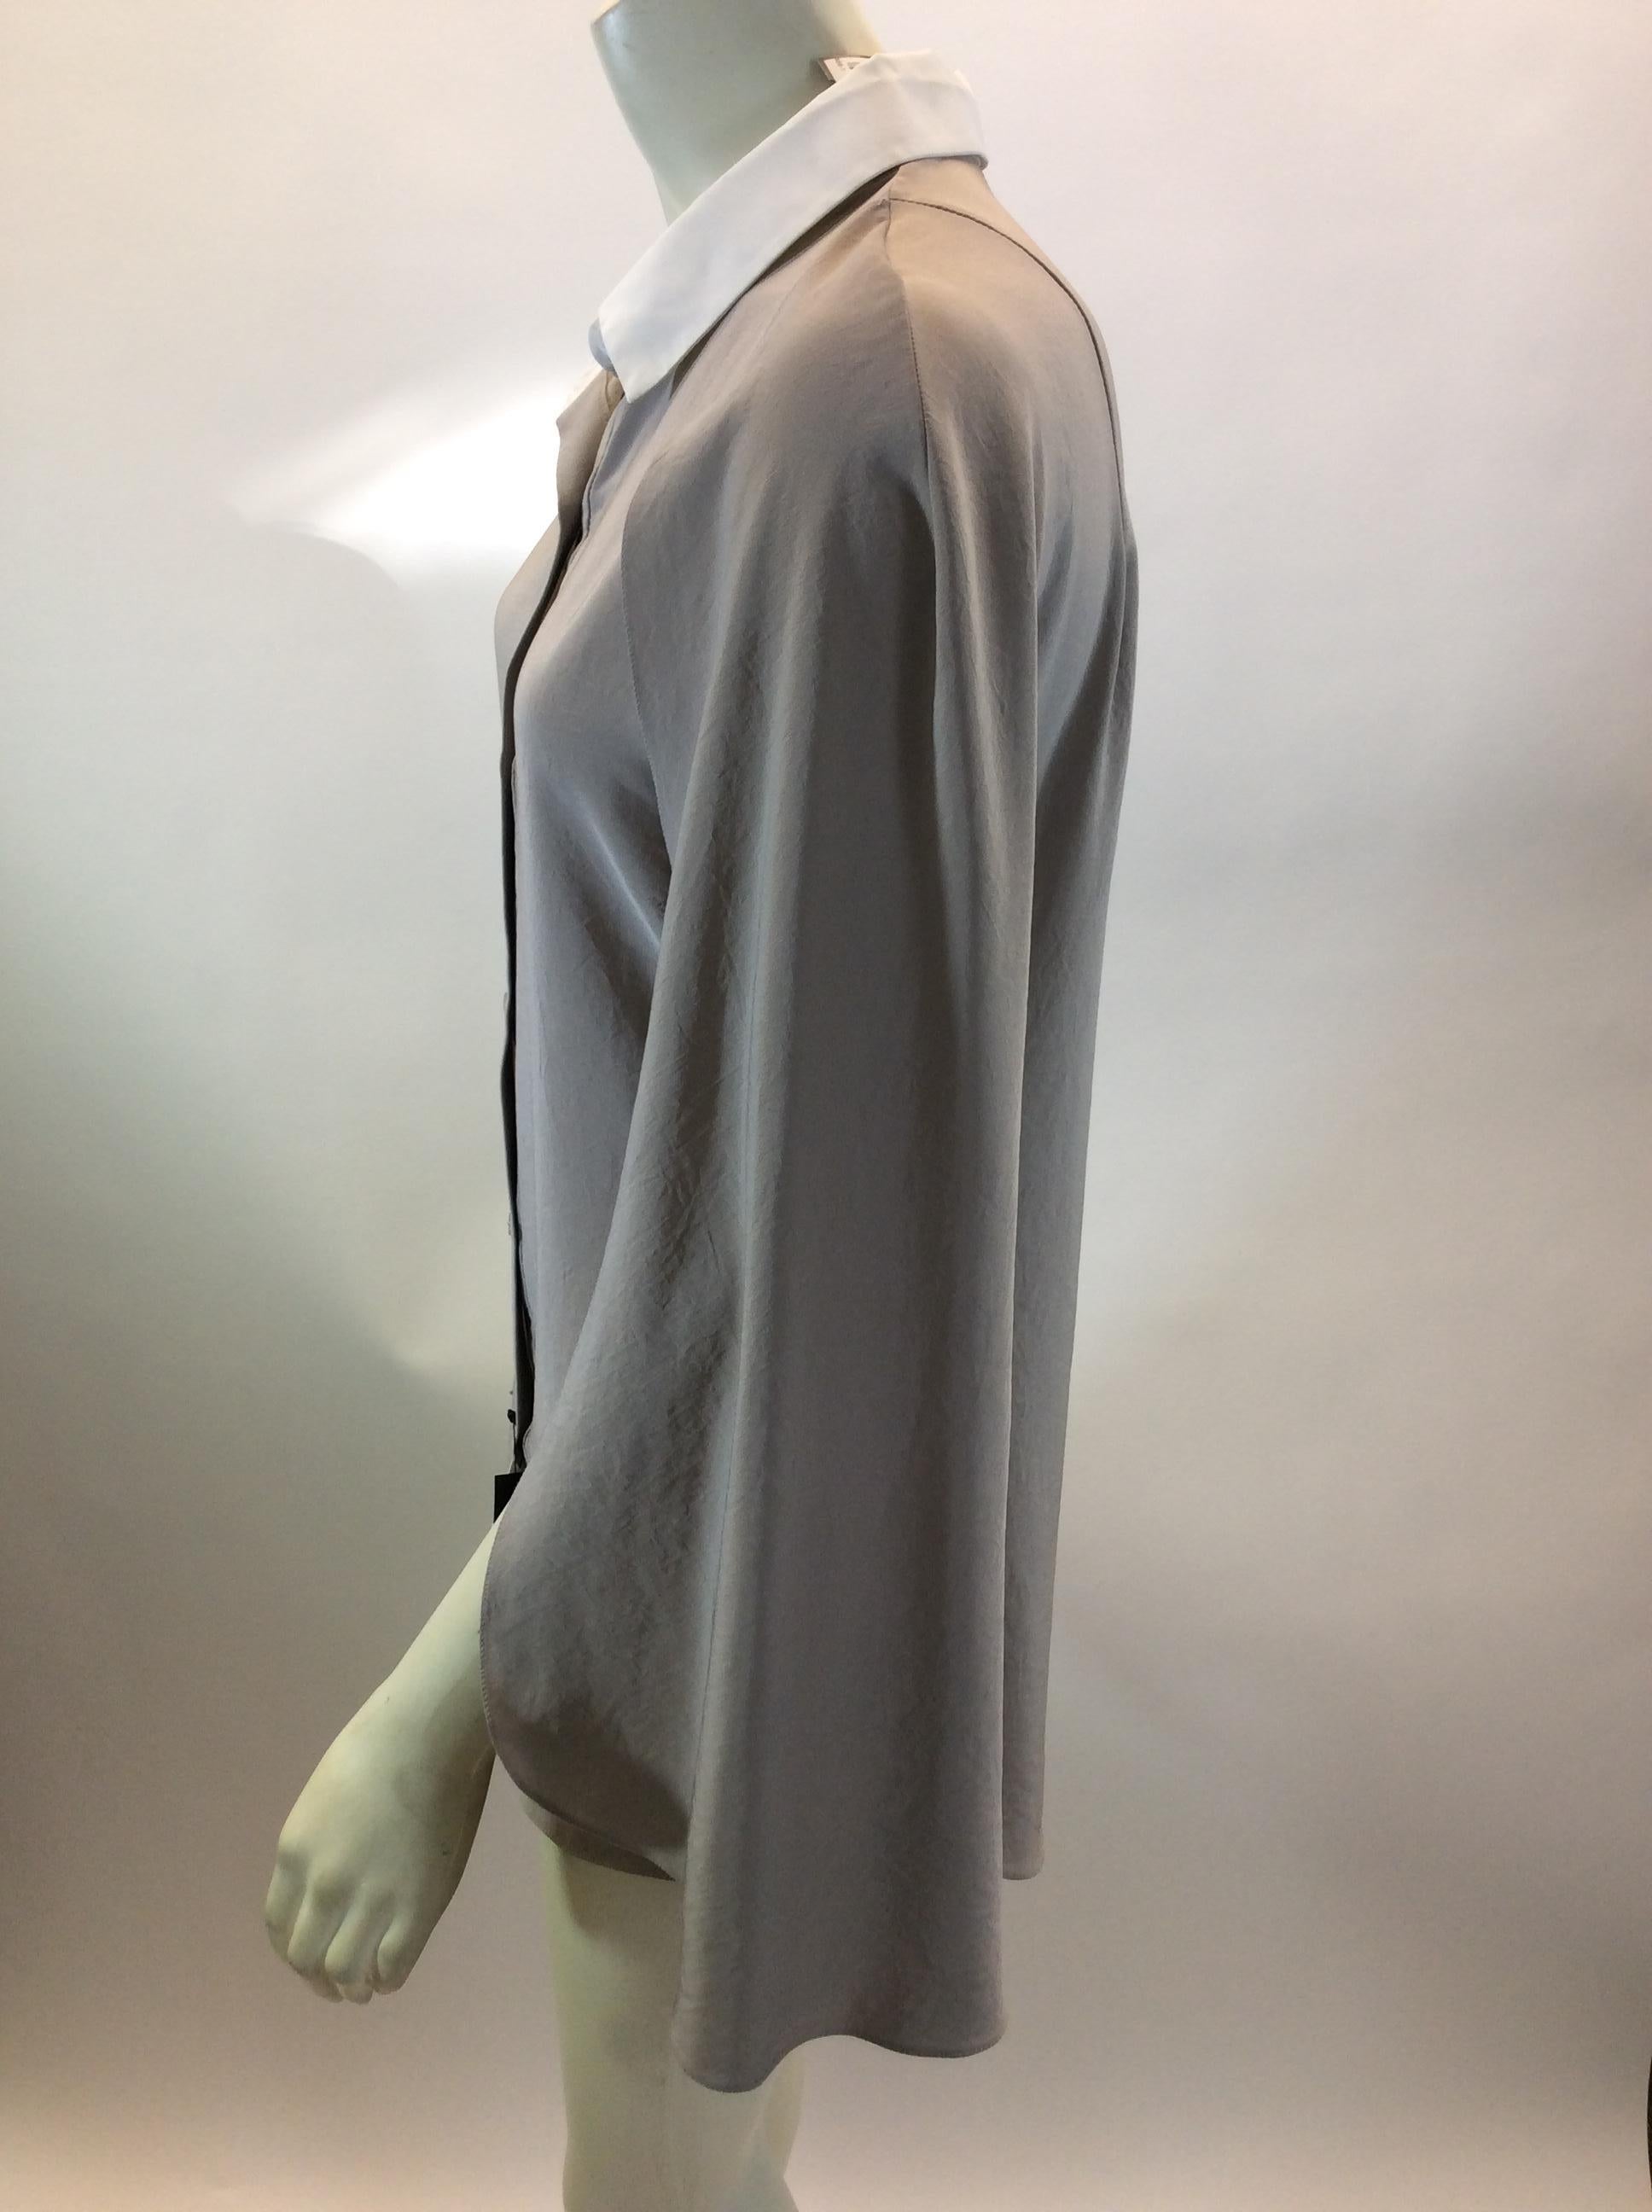 Carven Beige Blouse NWT
$128
Made in Hungary
57% Triacetate, 43% Polyethylene/ 73% Polyester, 27% Silk
Size 42
Length 26